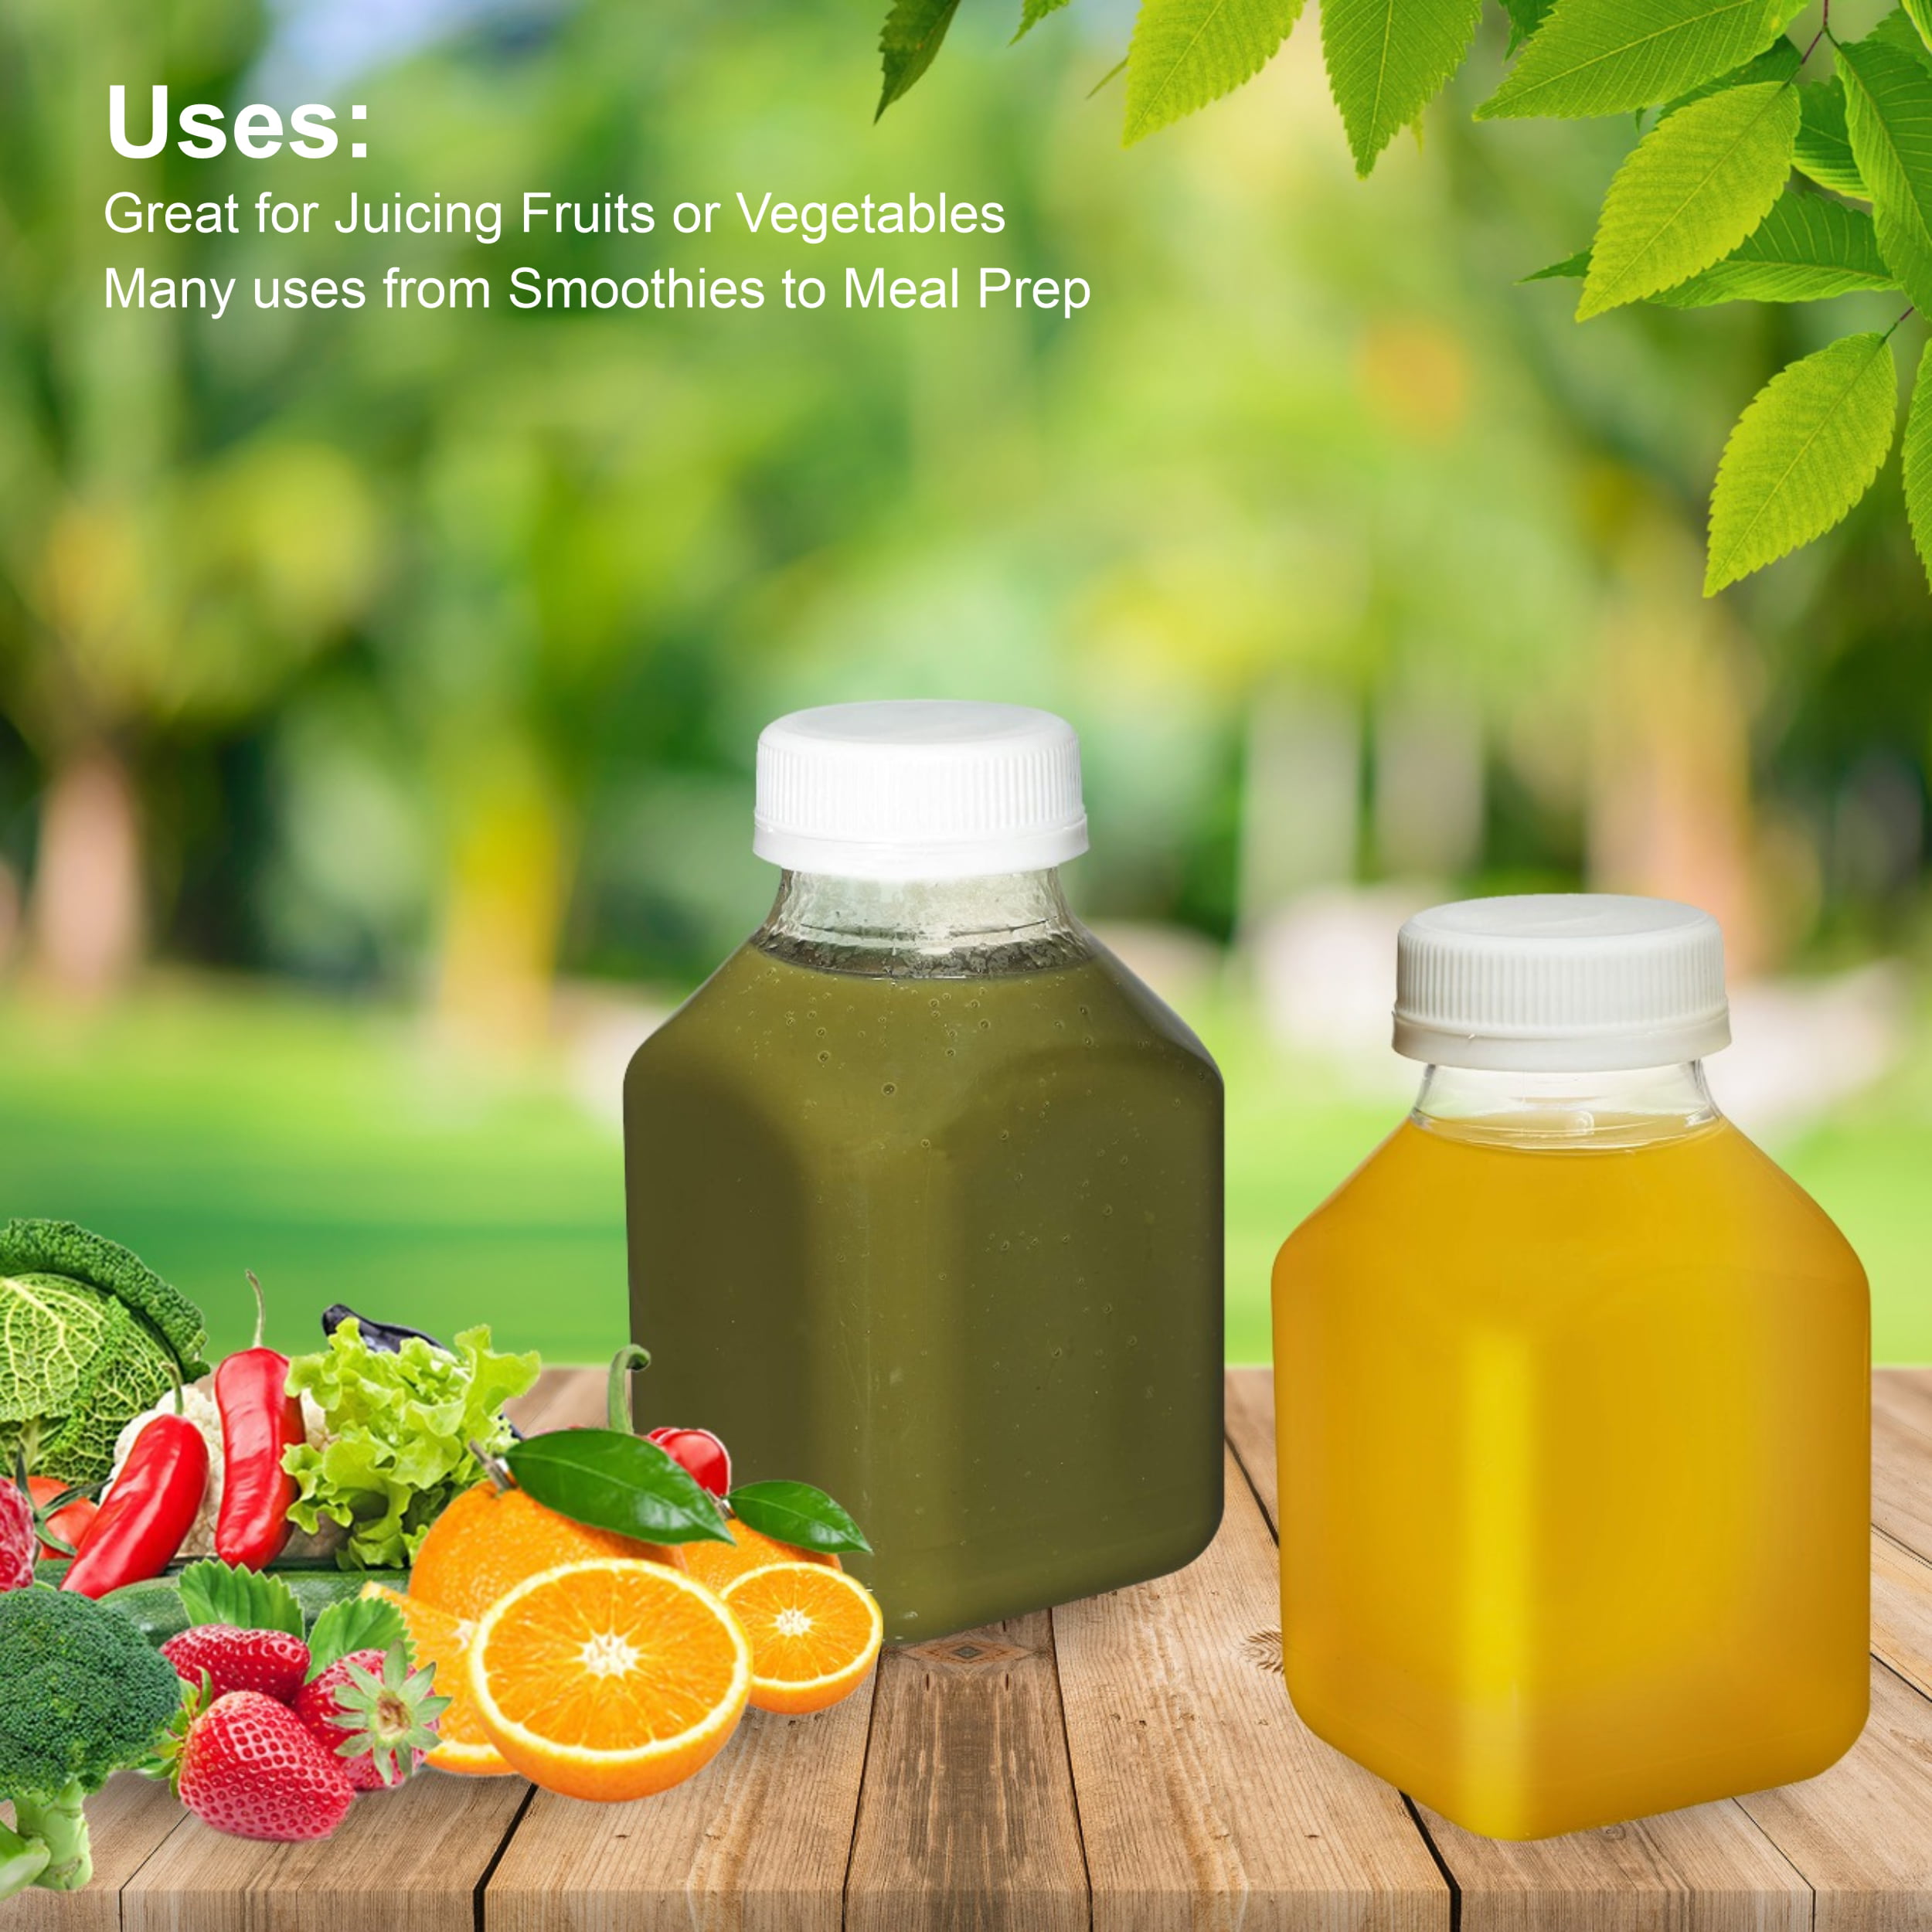 OAMCEG 36 PCS Juice Bottles with Caps, 8 oz Small Bottles for Liquids,  Plastic Containers with Lids,…See more OAMCEG 36 PCS Juice Bottles with  Caps, 8